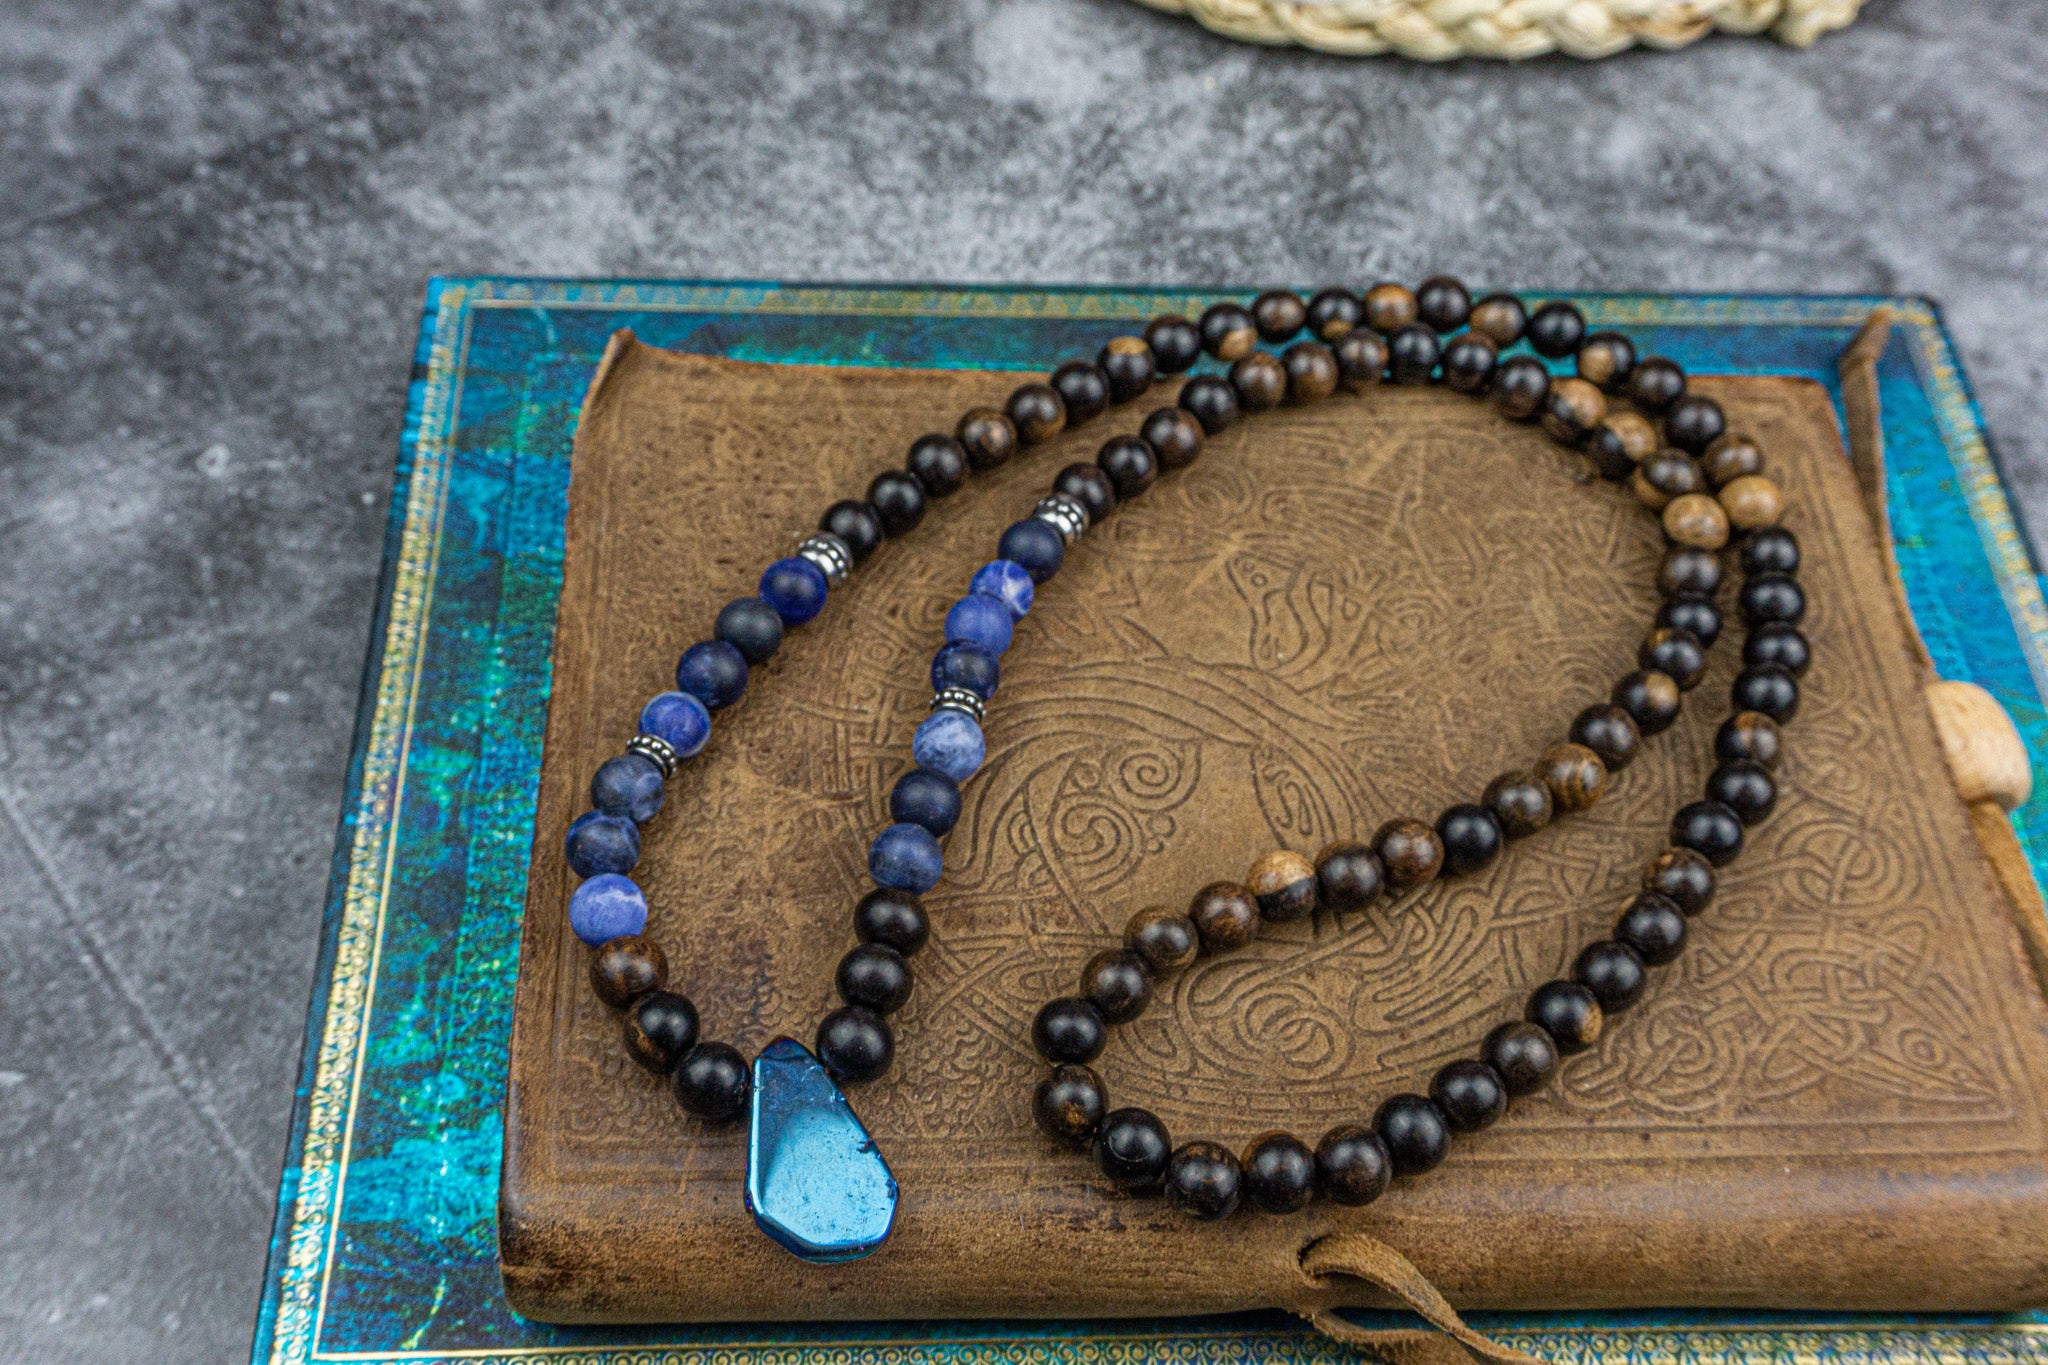 mens ebony wood, sodalite gemstone and stainless steel beaded necklace with quartz crystal as central pendant